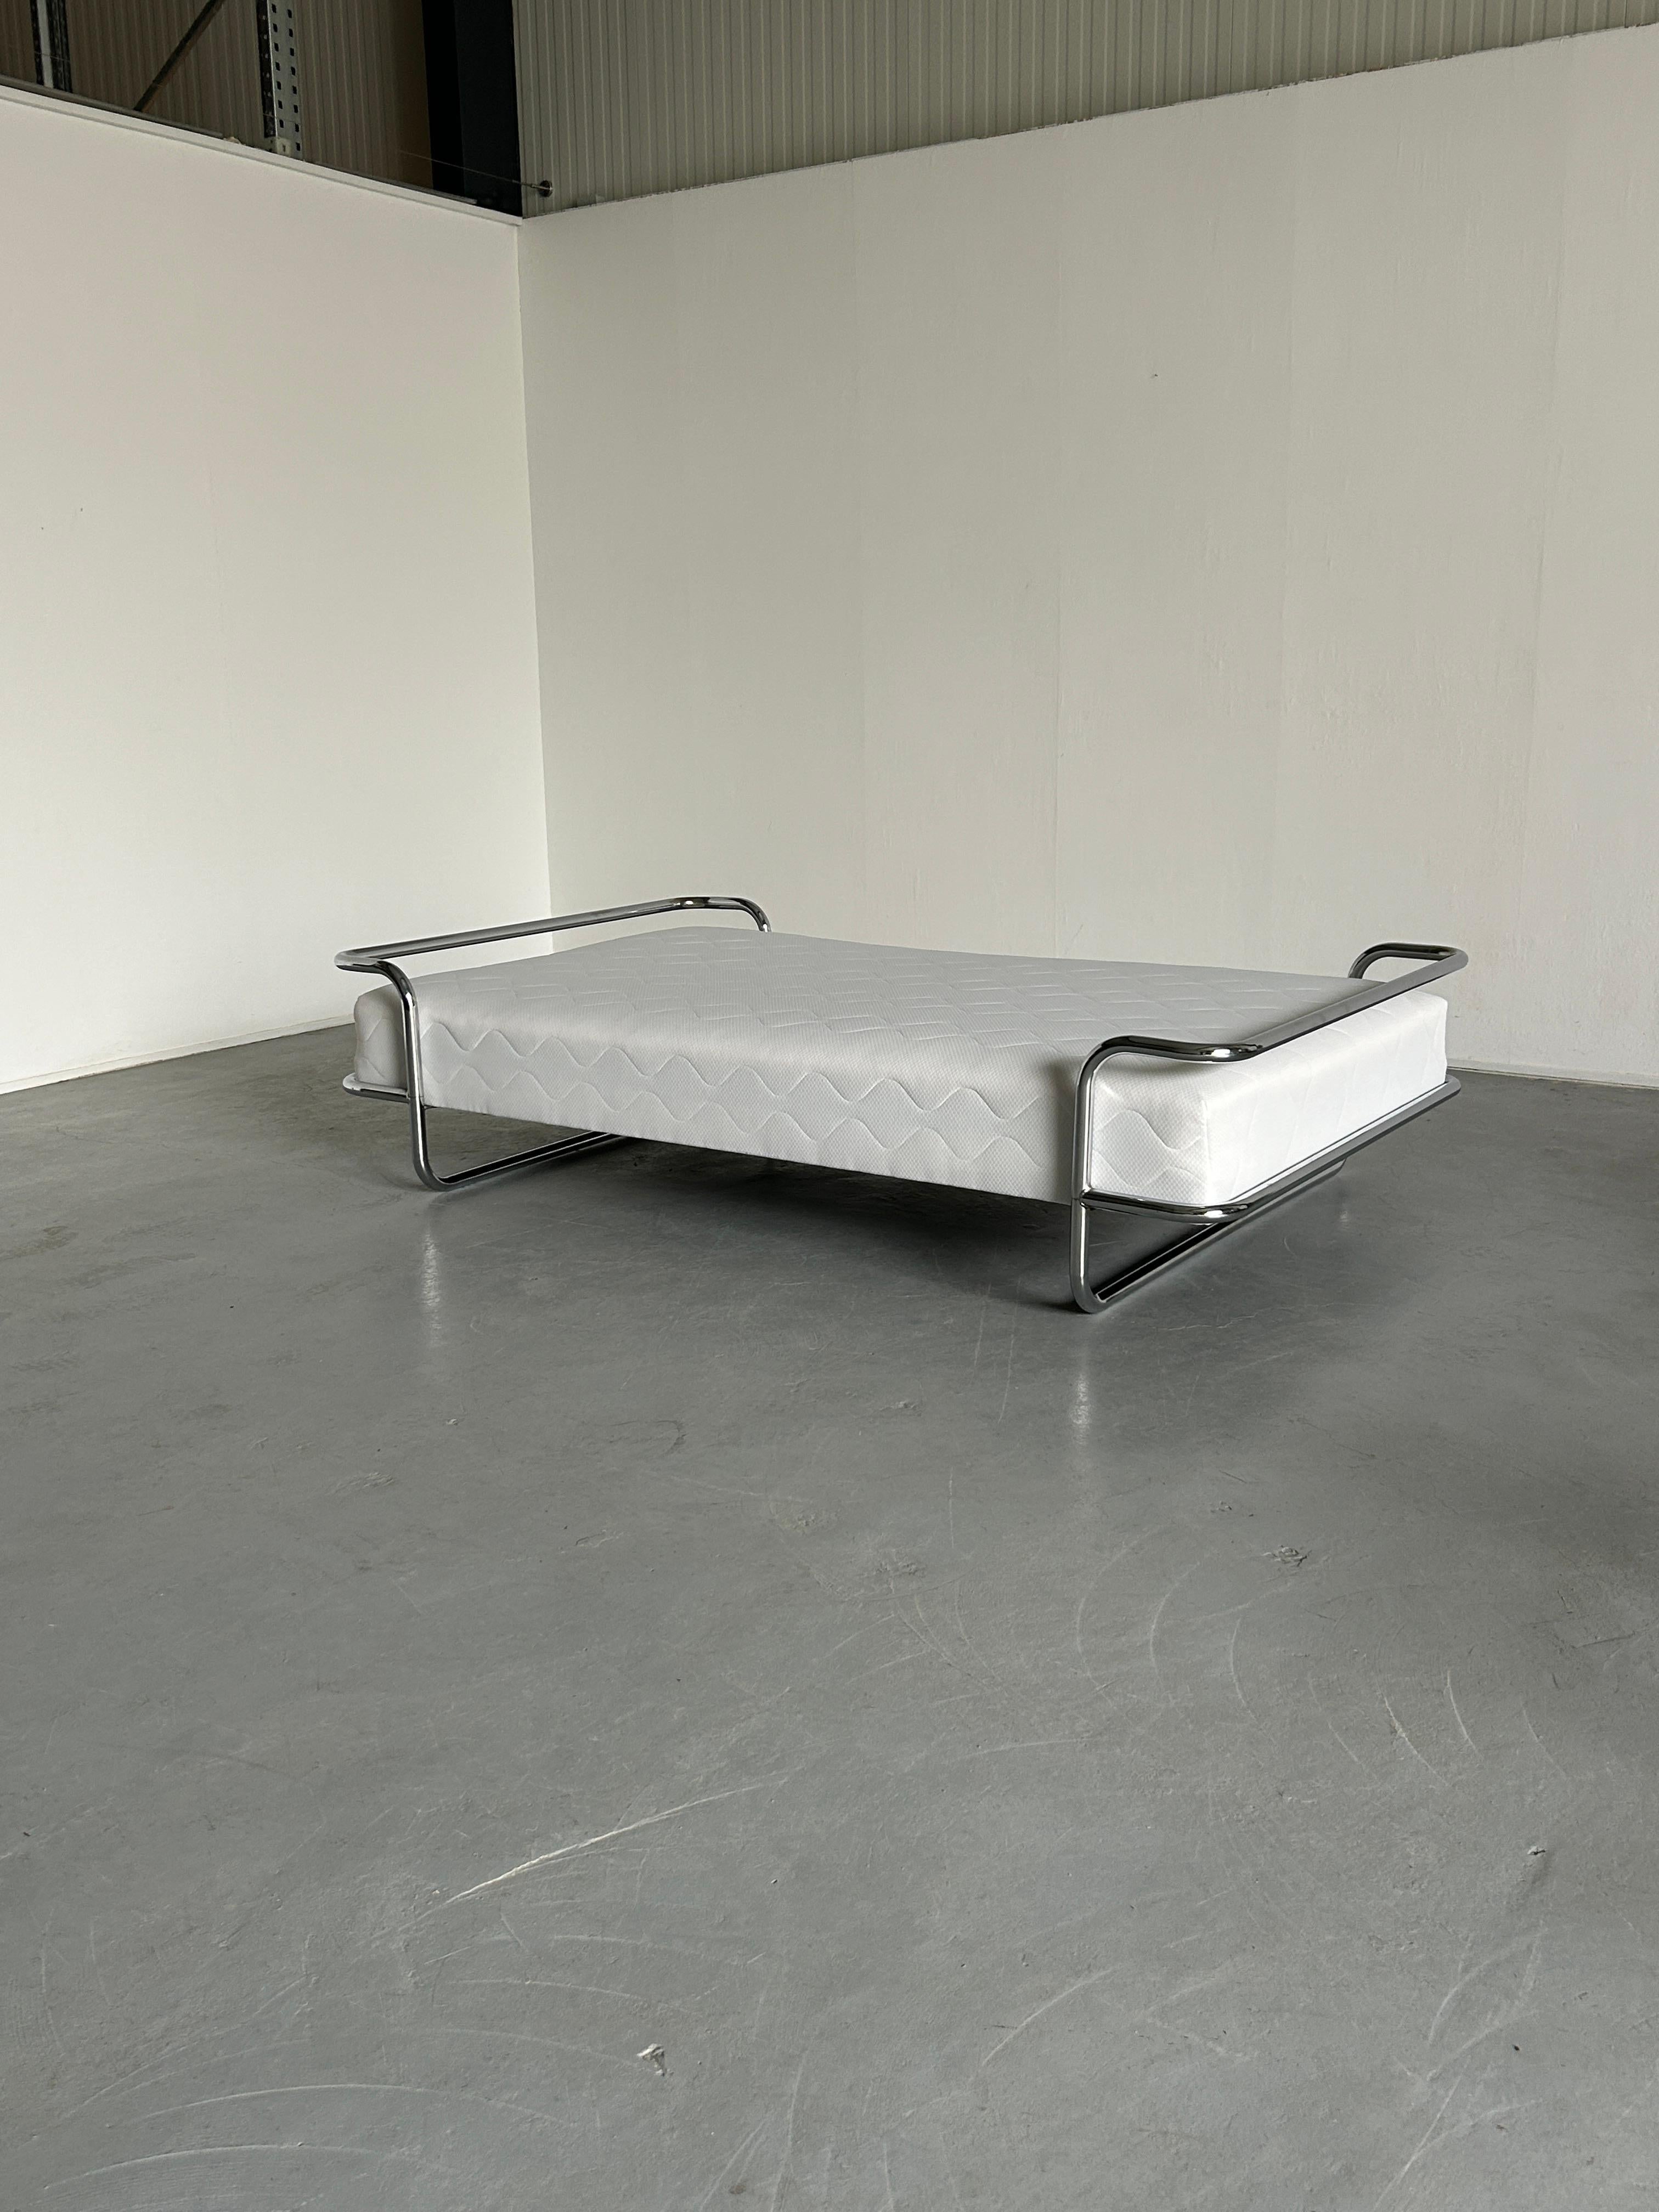 The iconic and rare vintage Ikea KROMVIK chrome bed with the original SULTAN sprung mattress, designed by Knut Hagberg, 1982.
The smaller version with an integrated small double mattress (120cm).

The modernist form takes clear inspiration from